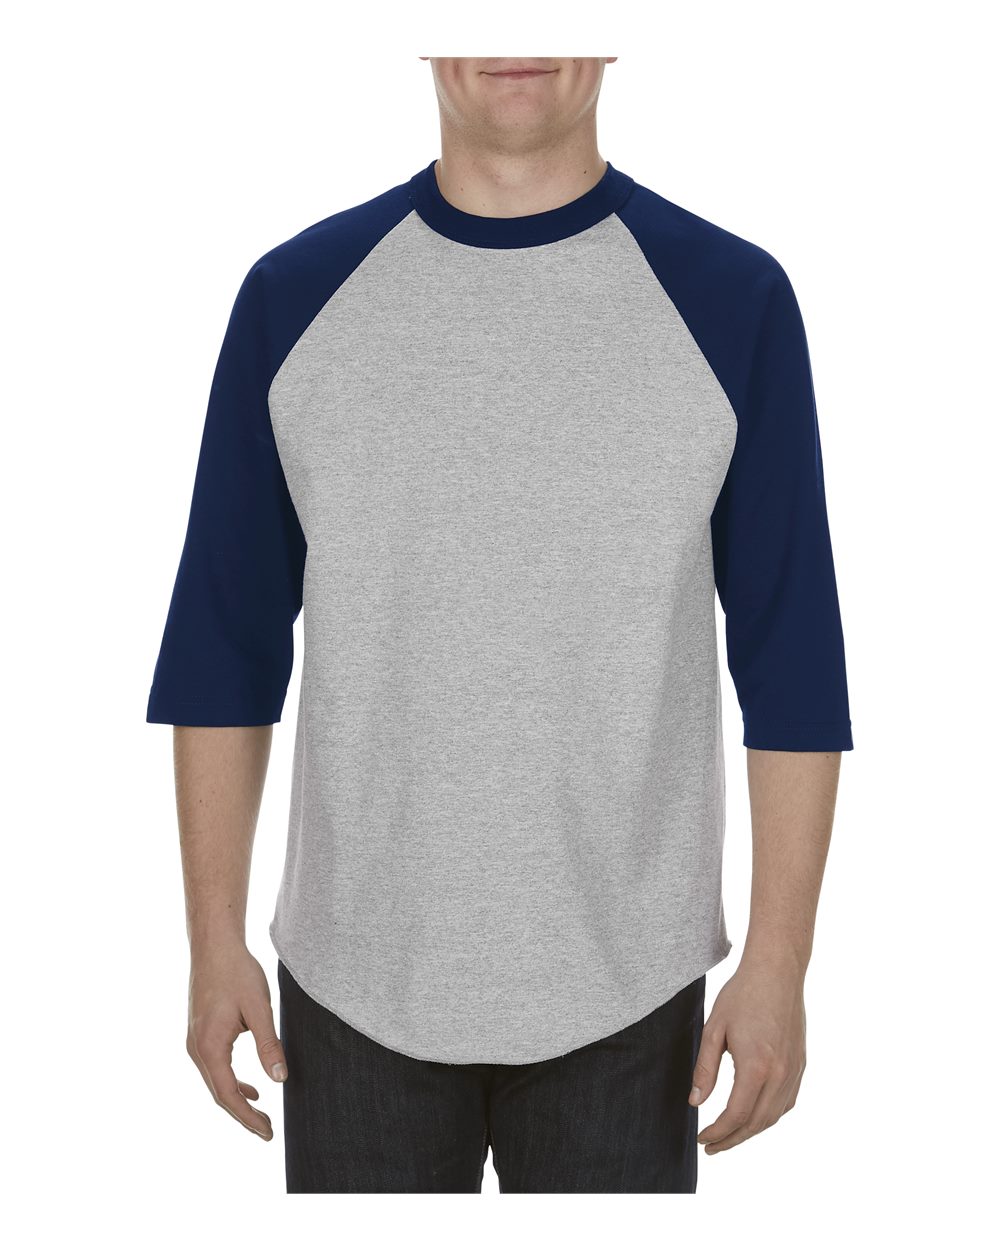 click to view Athletic Heather/ Navy